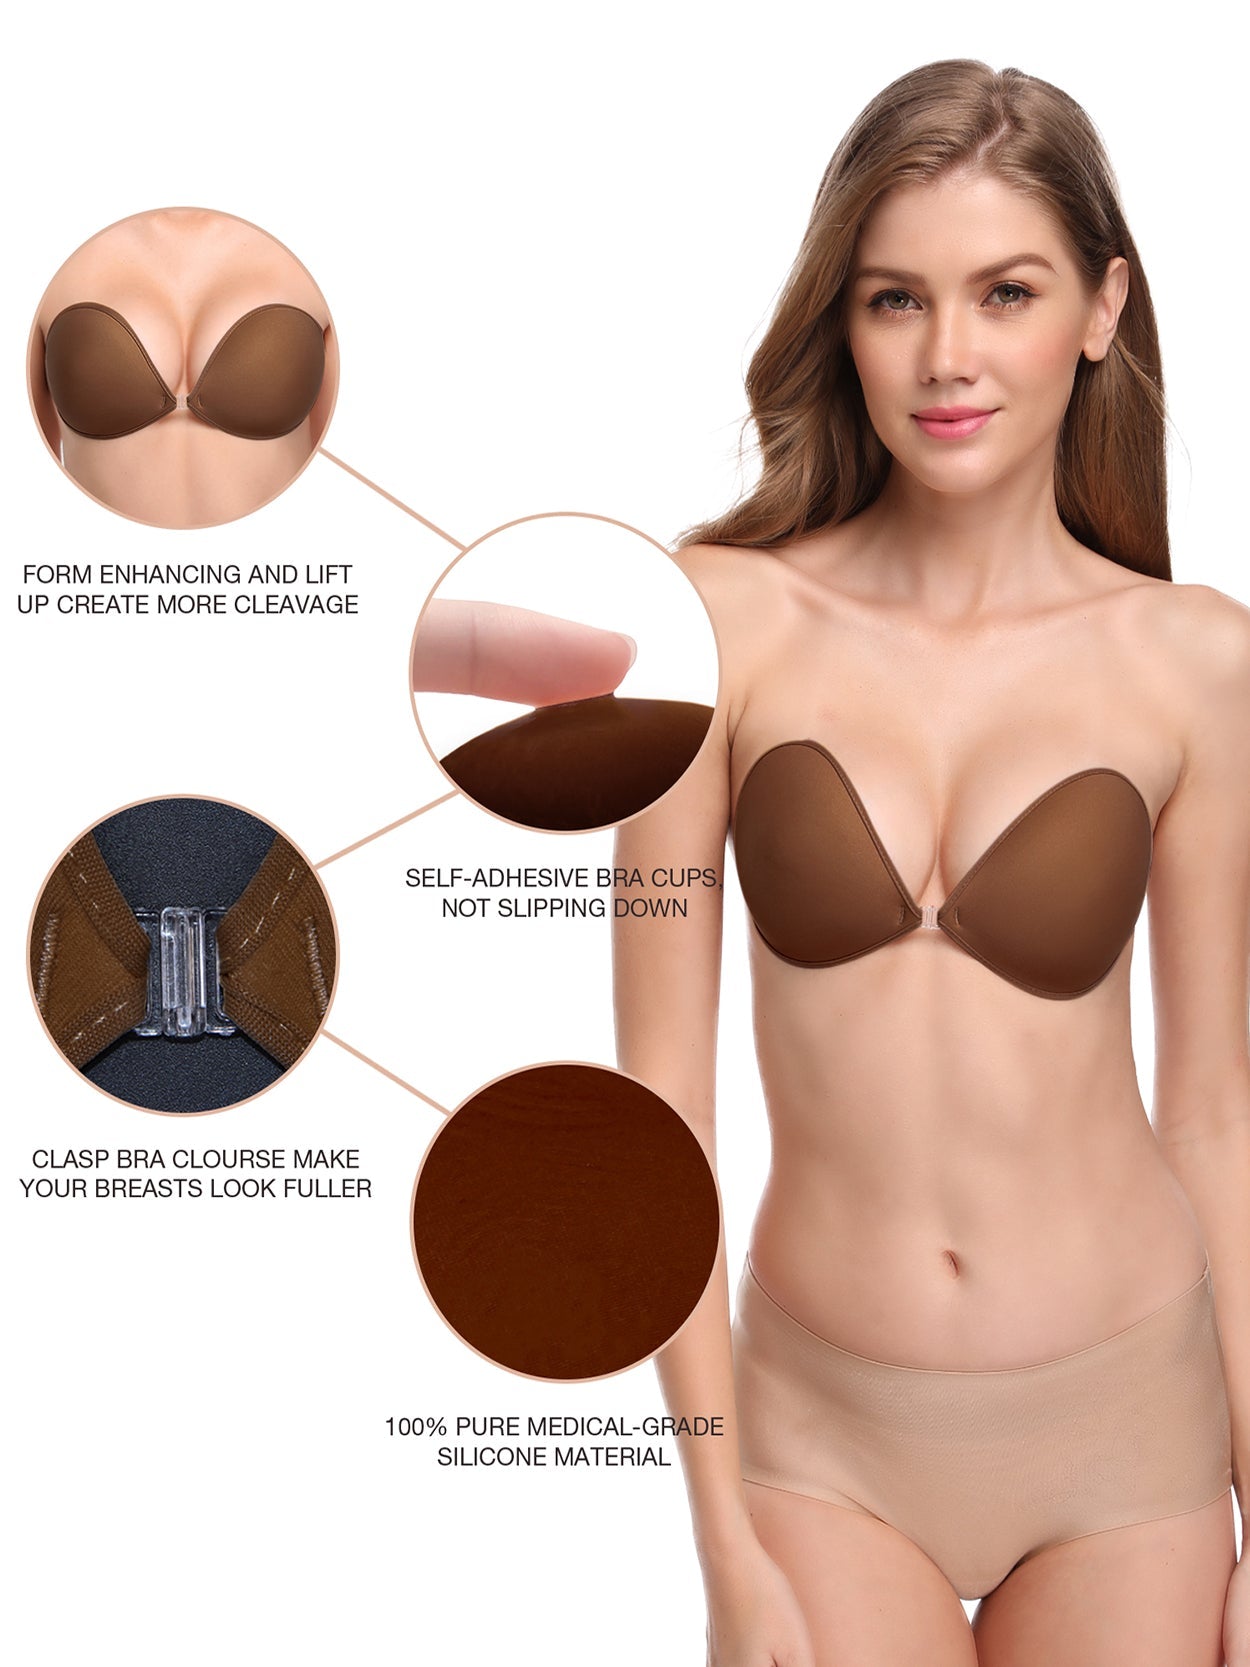 Wingslove Adhesive Bra Reusable Strapless Self Silicone - Import It All